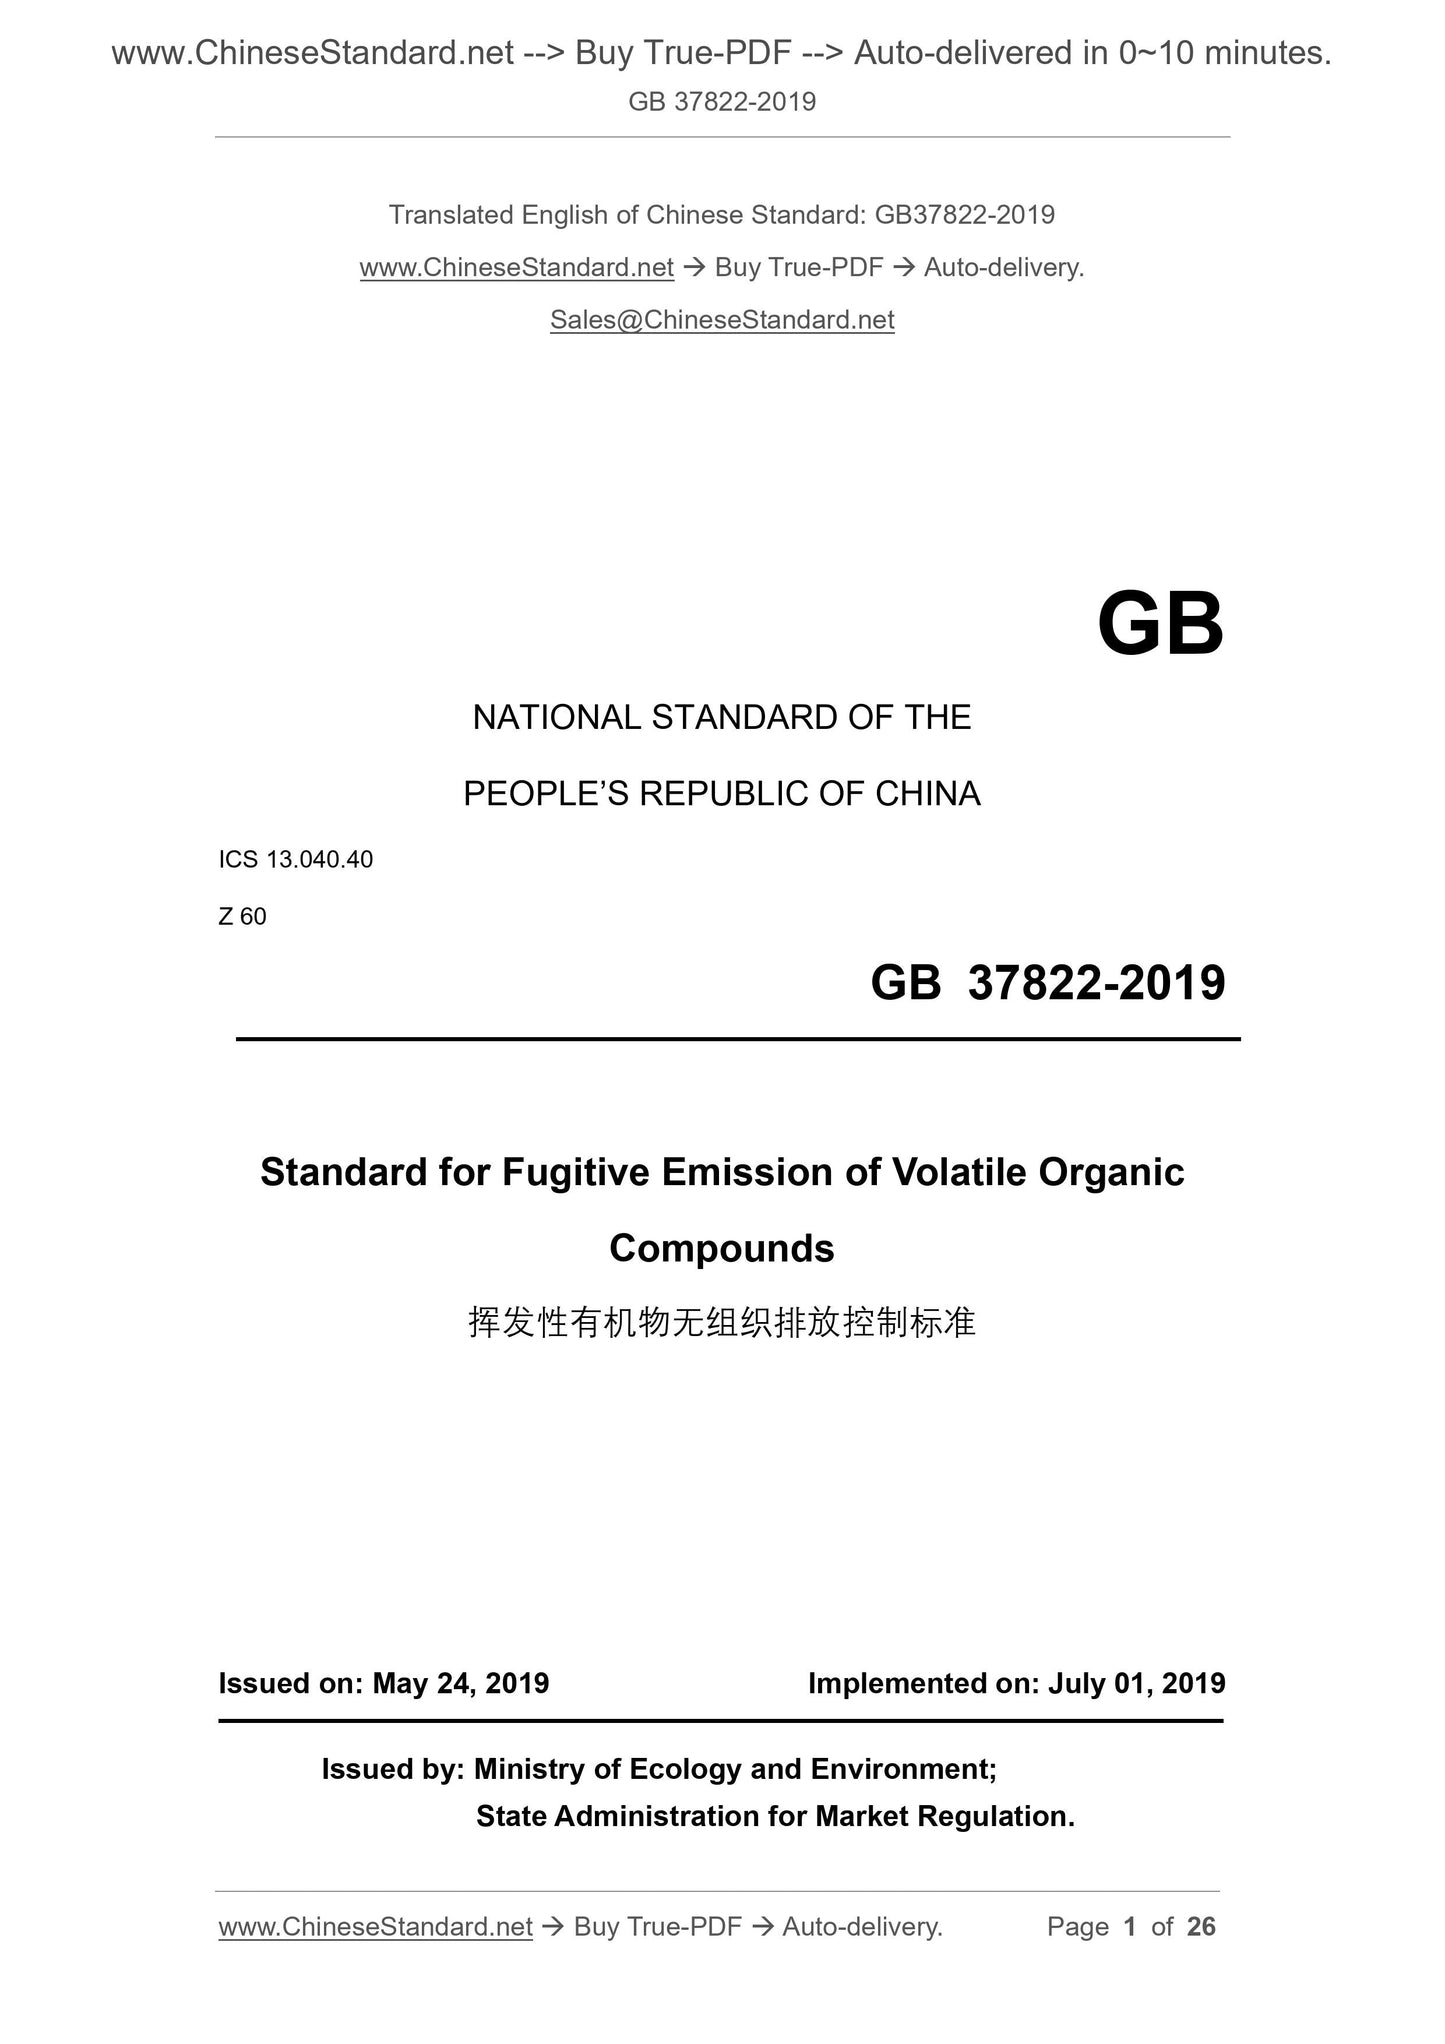 GB 37822-2019 Page 1